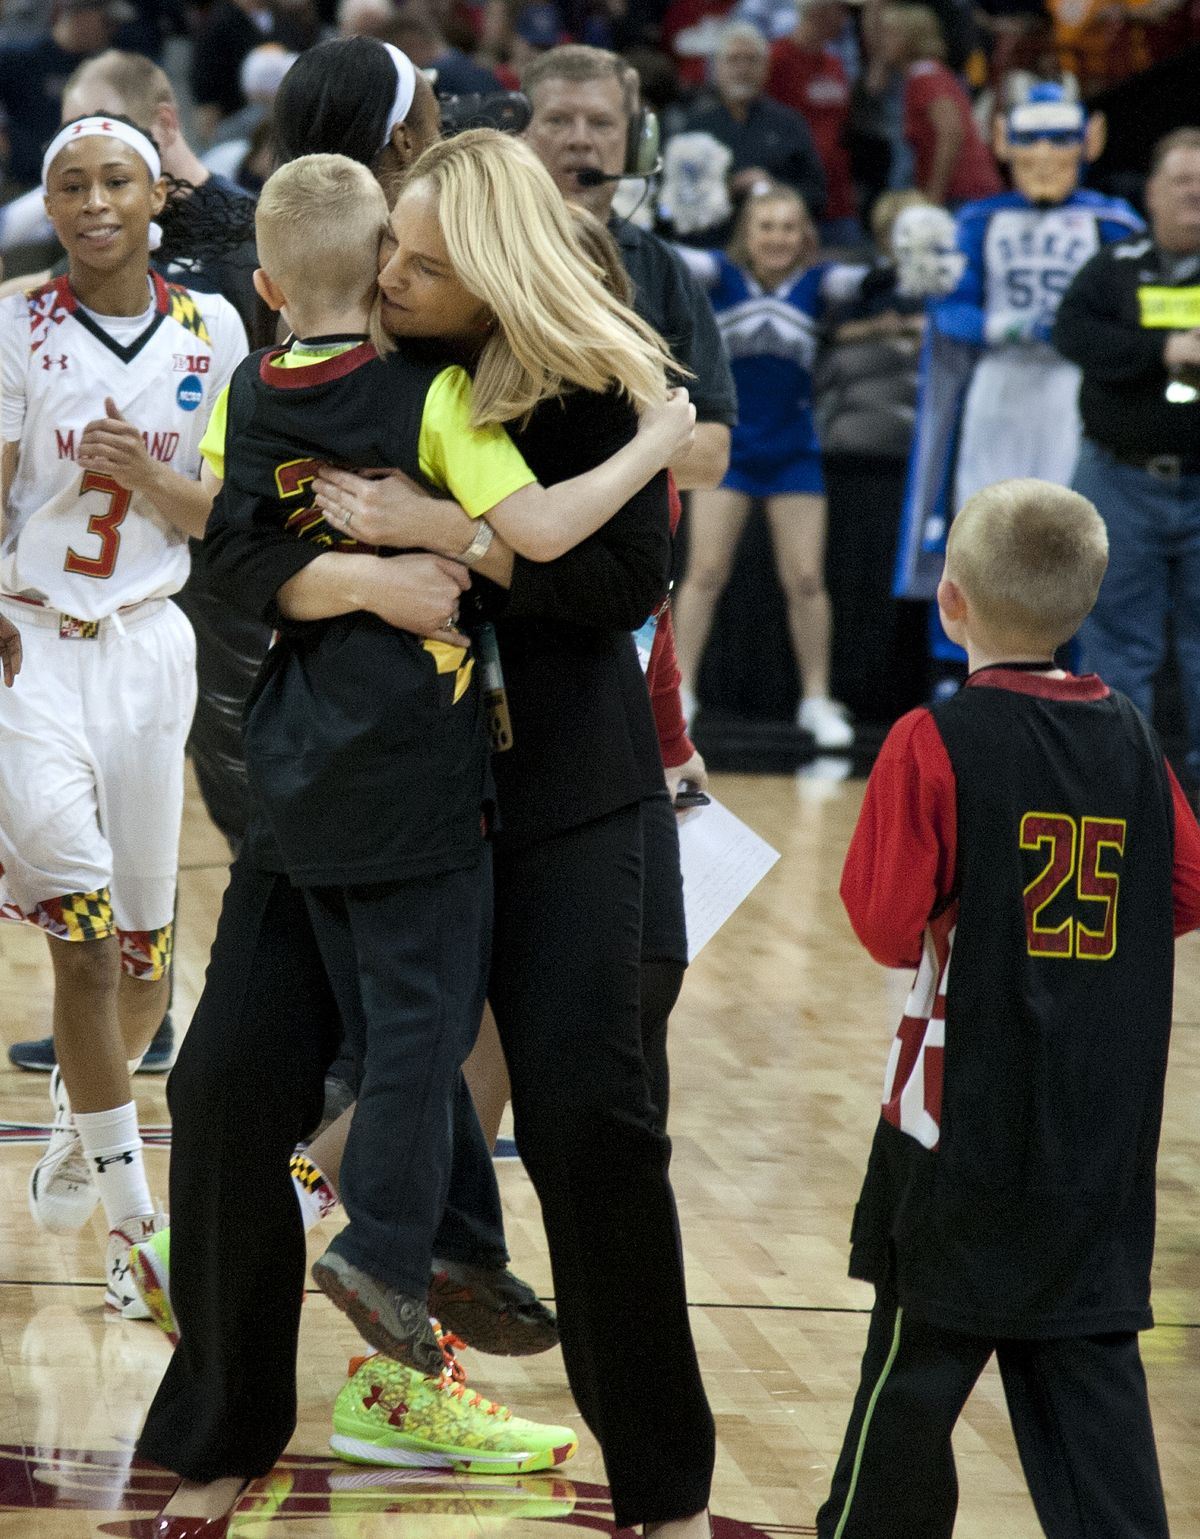 Maryland head coach Brenda Frese sweeps up her son Tyler Thomas after defeating Duke. (Dan Pelle)